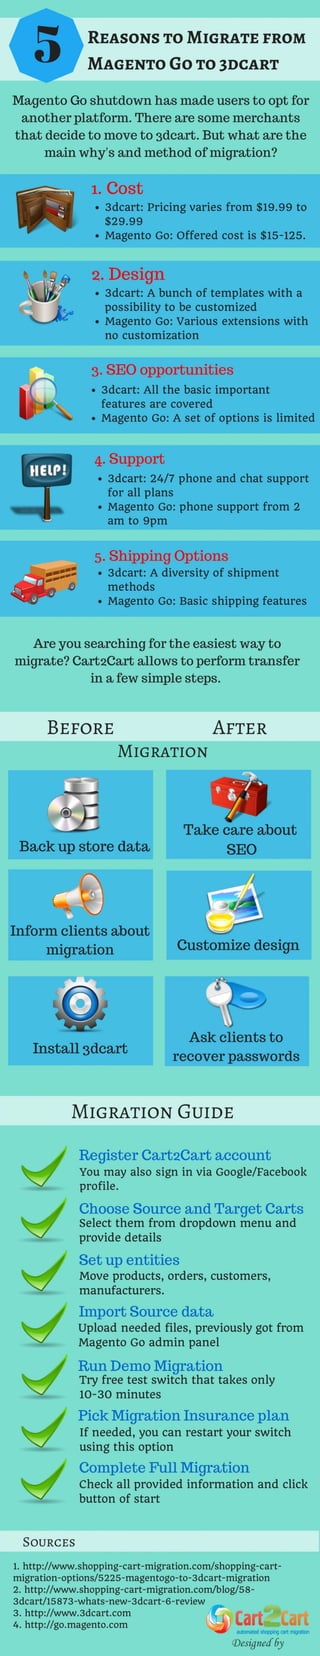 5 Reasons to Migrate from Magento Go to 3dcart